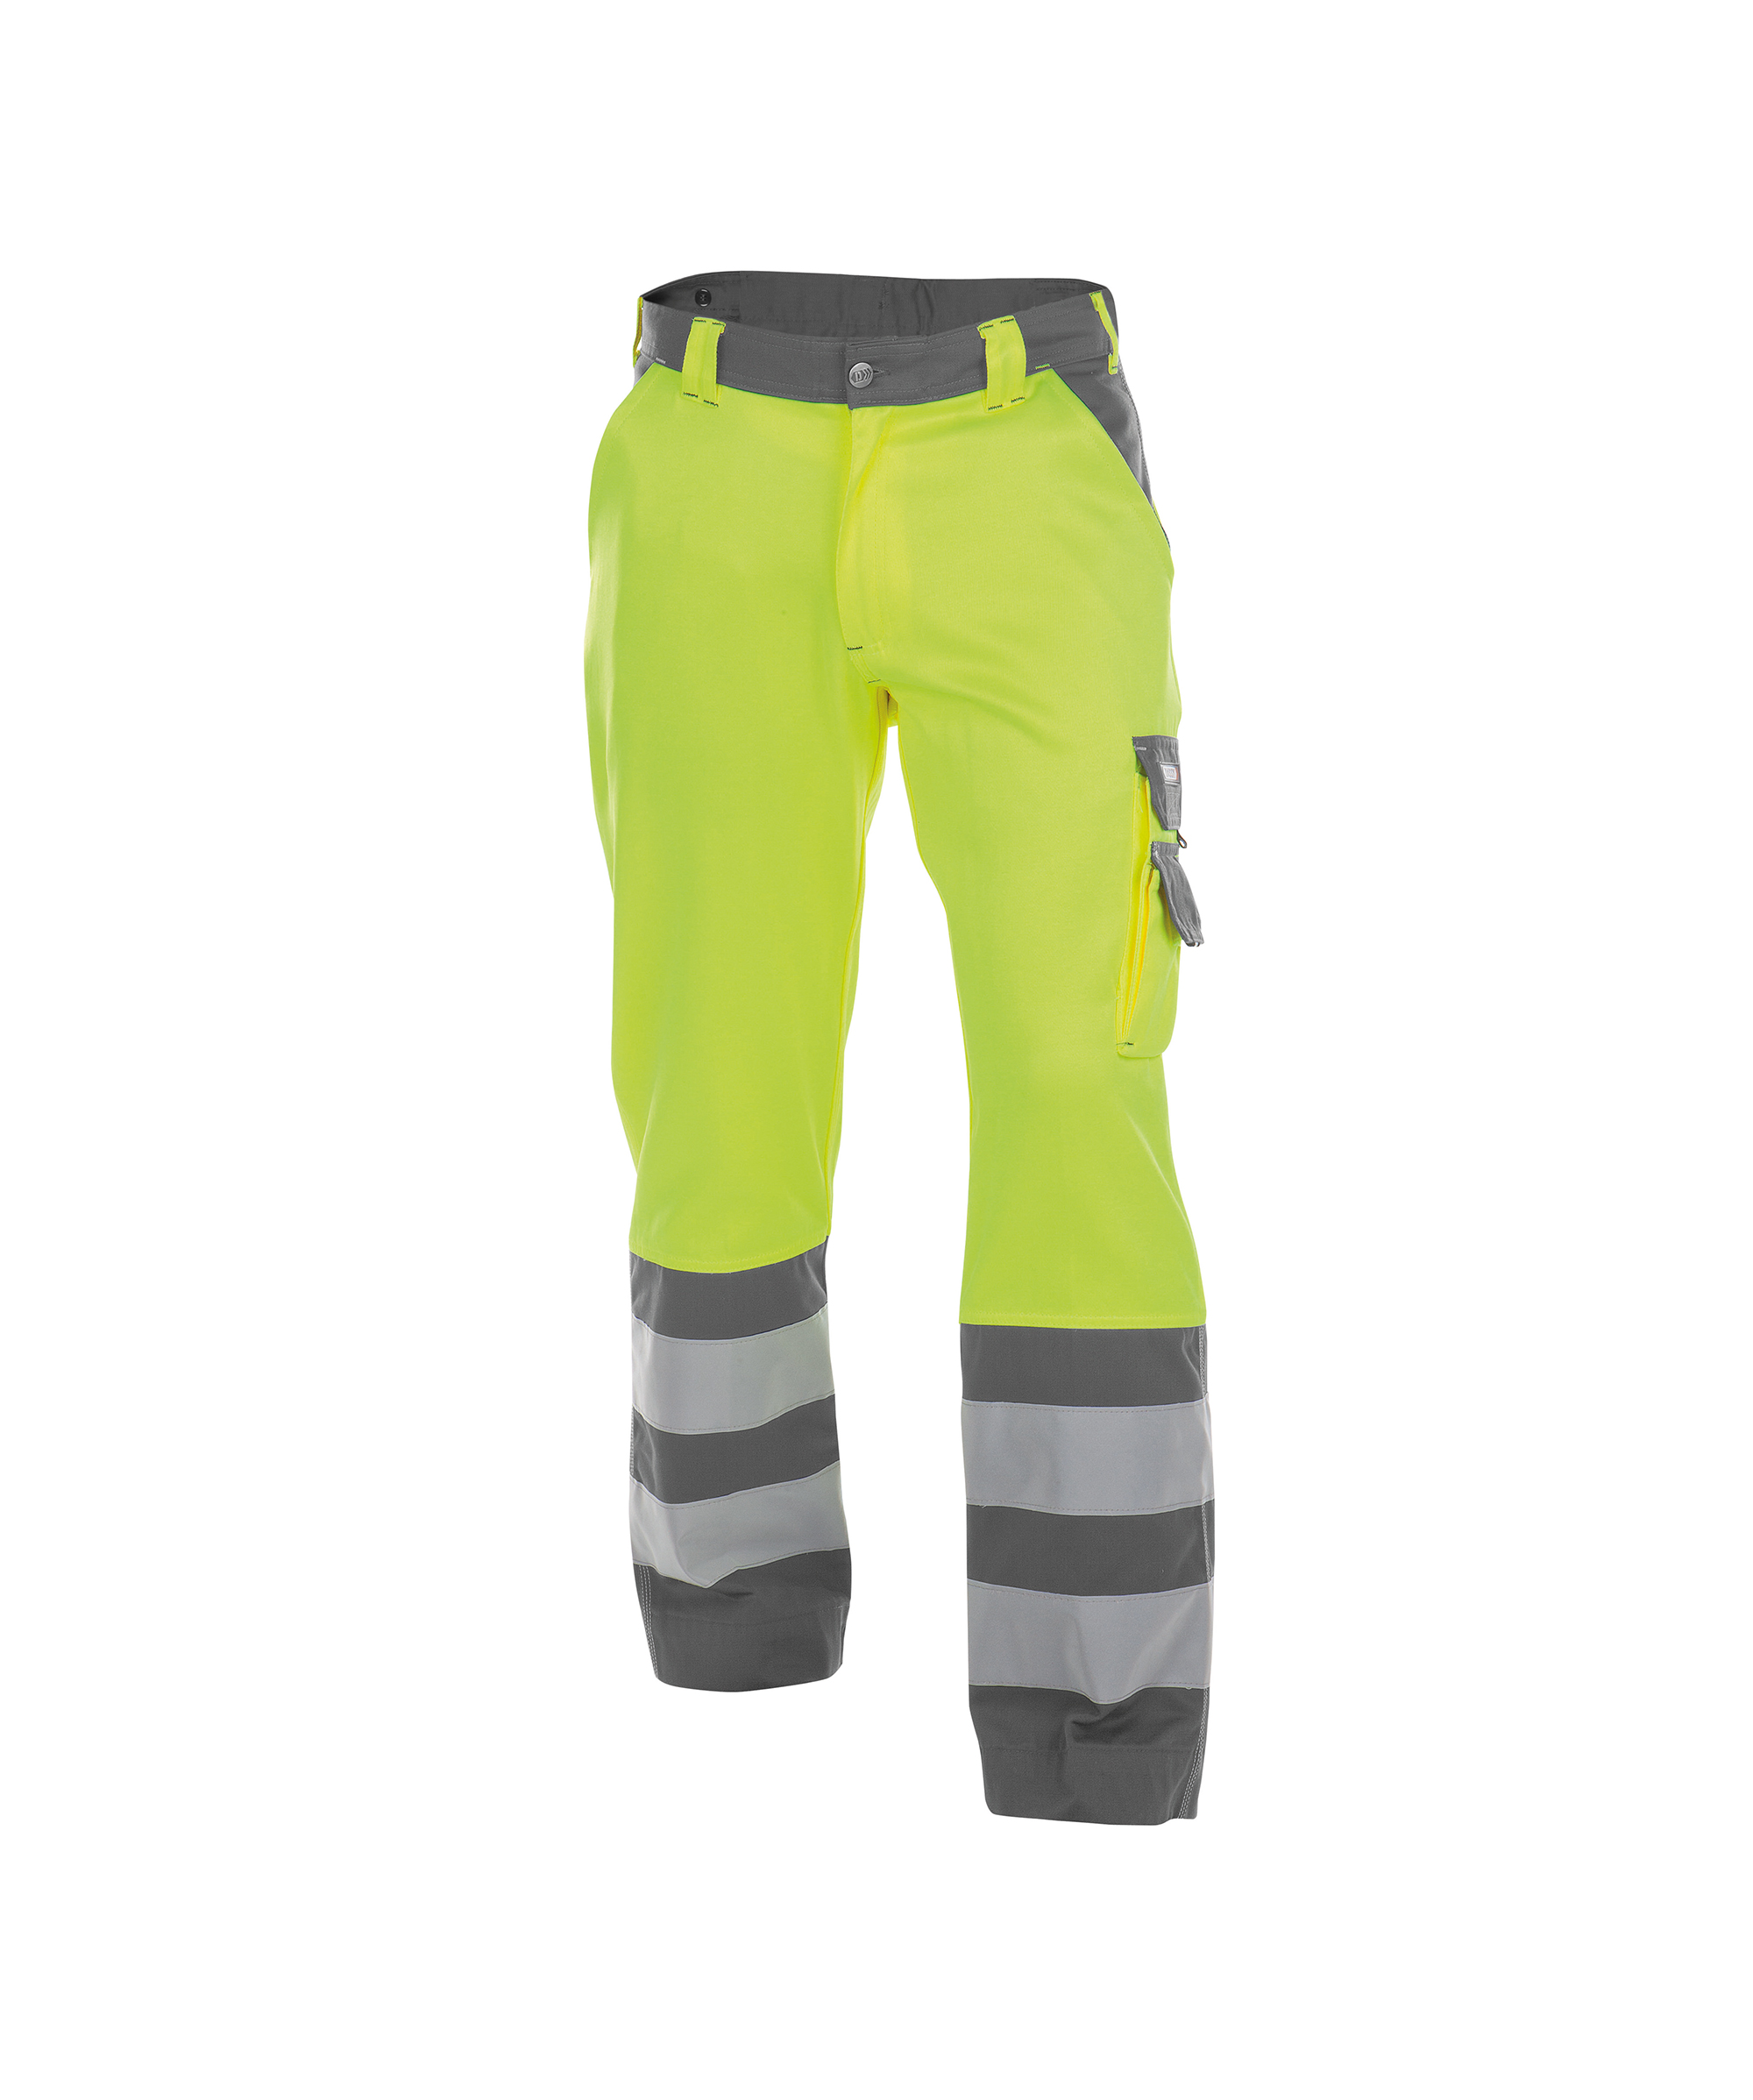 lancaster_high-visibility-work-trousers_fluo-yellow-cement-grey_front.jpg